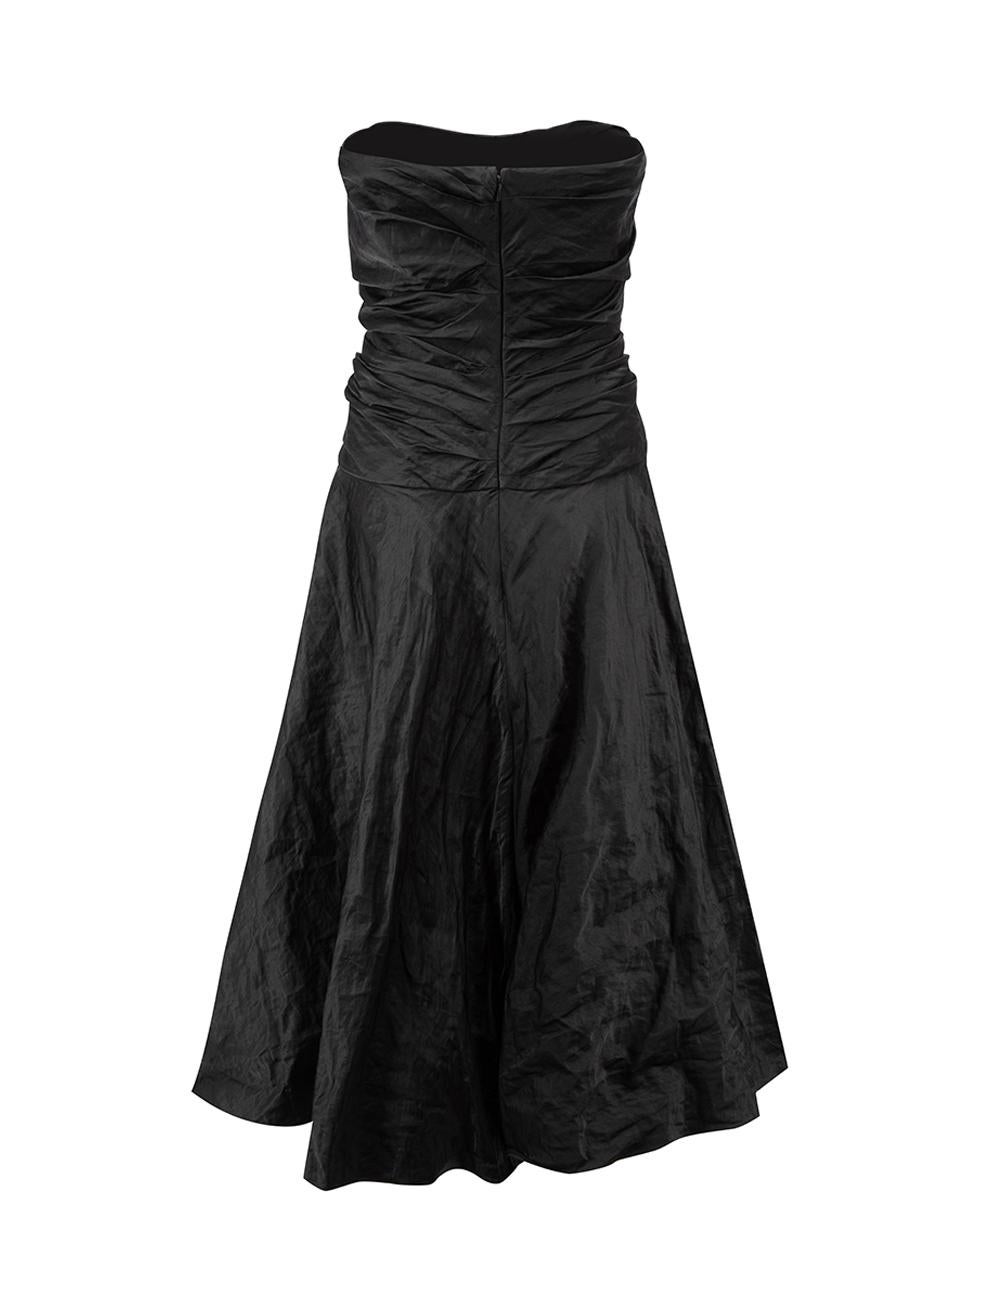 Ralph Lauren Black Label Black Cotton Ruched Strapless Midi Dress Size S In Good Condition In London, GB